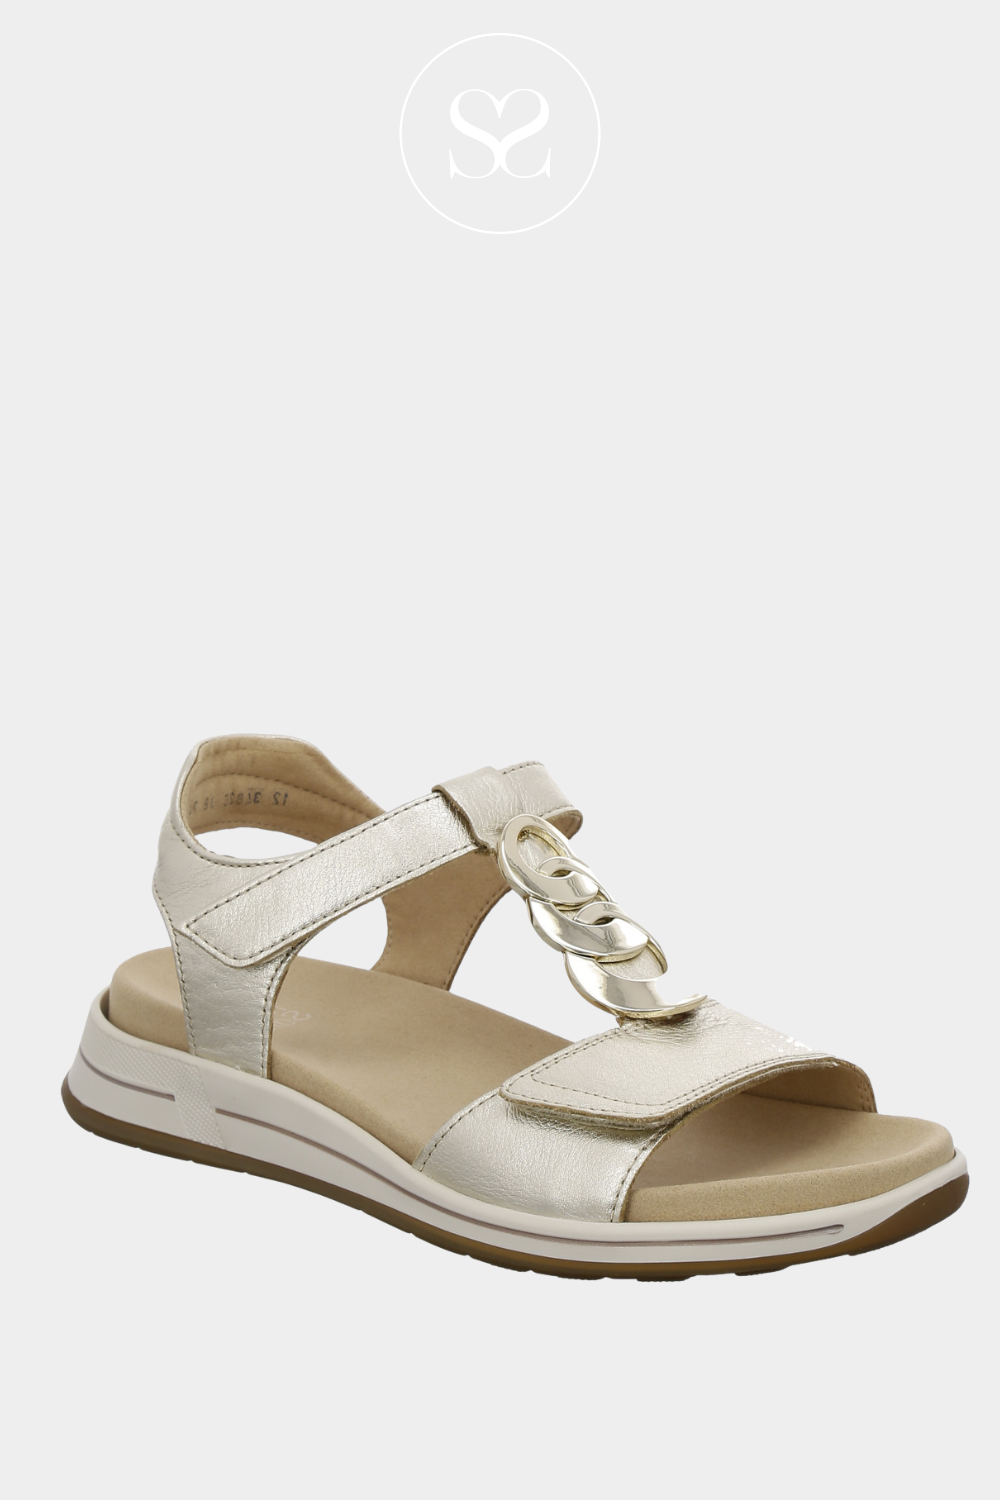 ARA 12-34826 GOLD LEATHER METALLIC WALKING LOW WEDGE SANDALS WITH TWO THICK VELCRO STRAPS AND GOLD CHAIN DETAIL